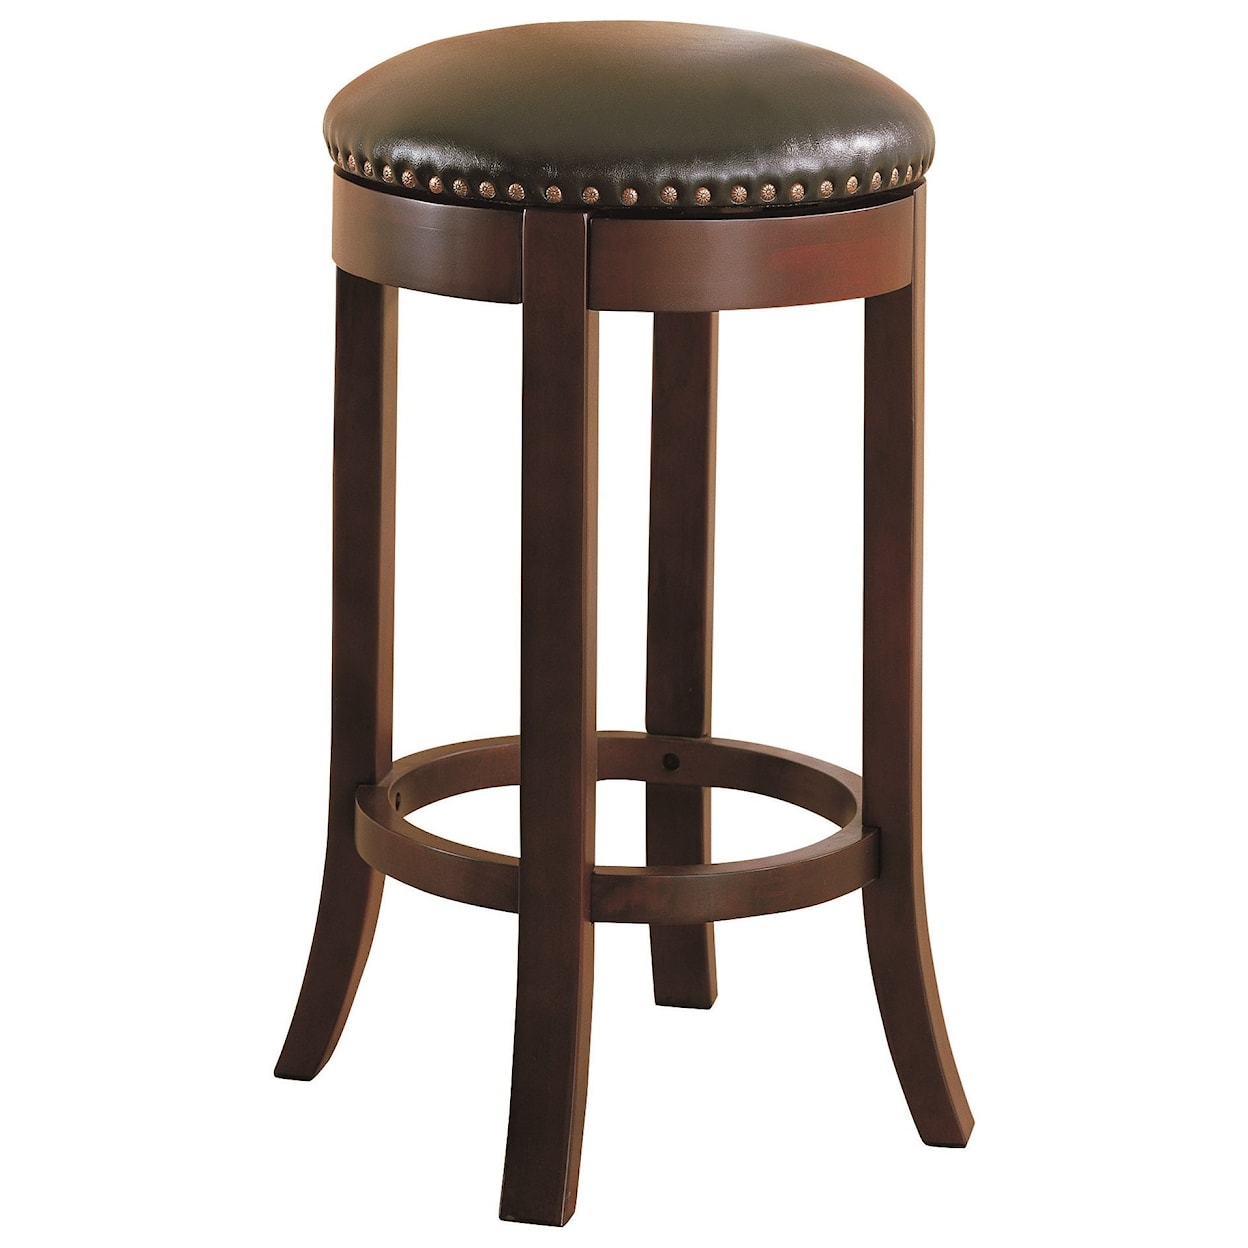 Coaster Dining Chairs and Bar Stools 29" Swivel Bar Stool with Upholstered Seat